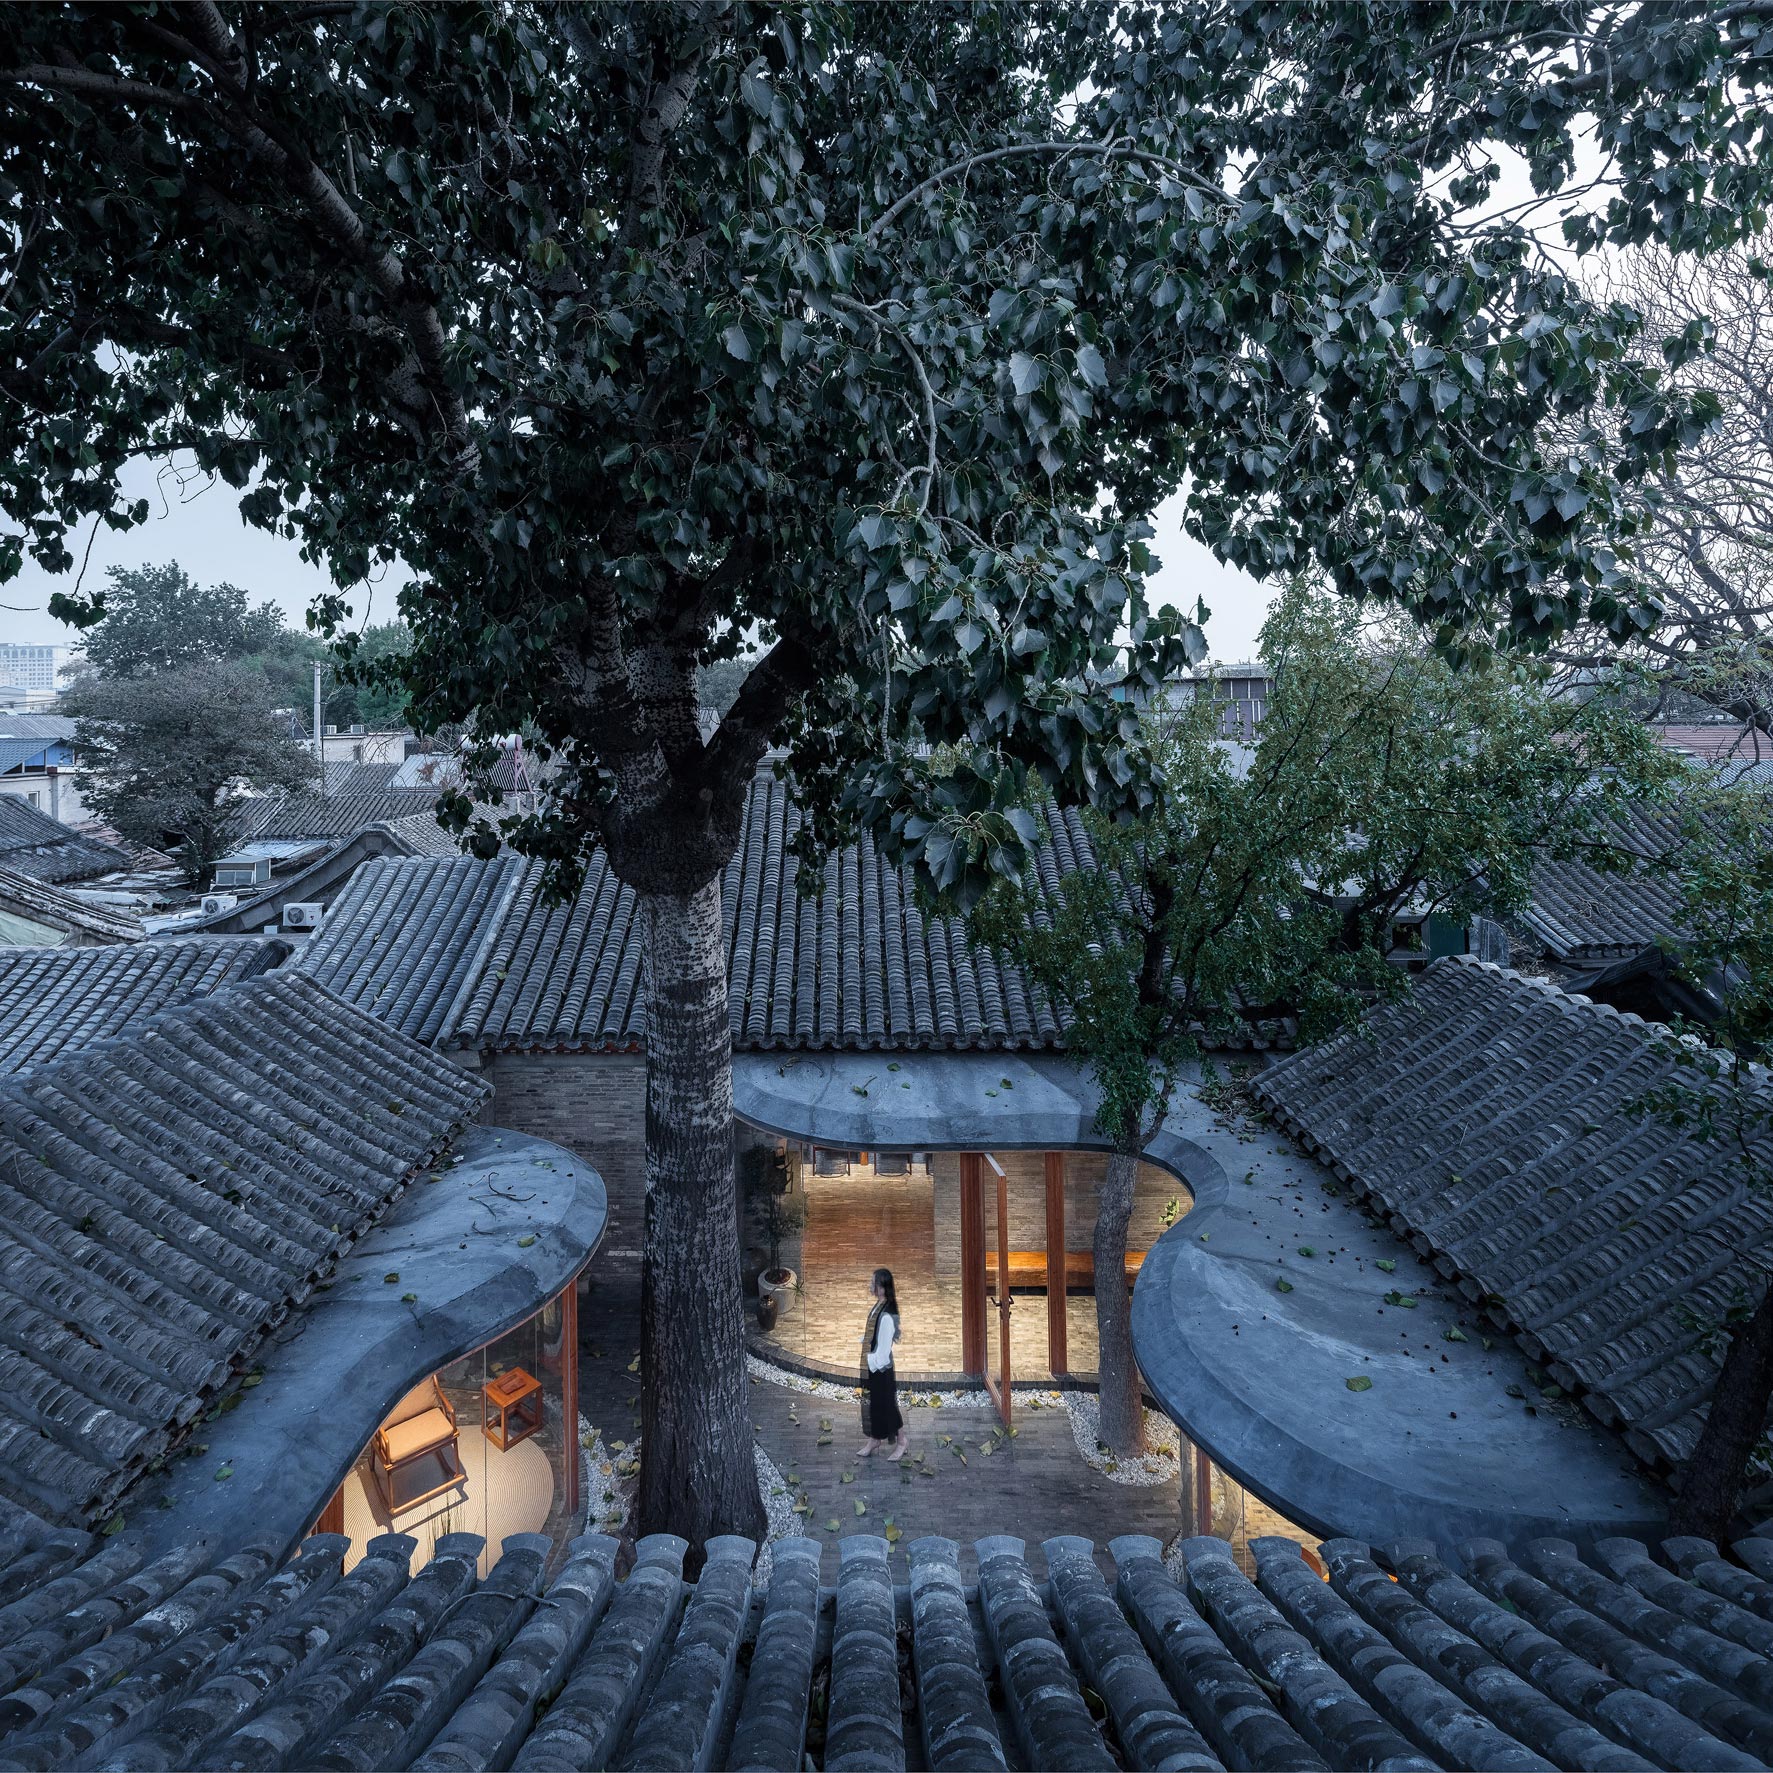 Dezeen's top 10 Chinese architecture projects of 2020: Qishe Courtyard, Beijing, by Arch Studio